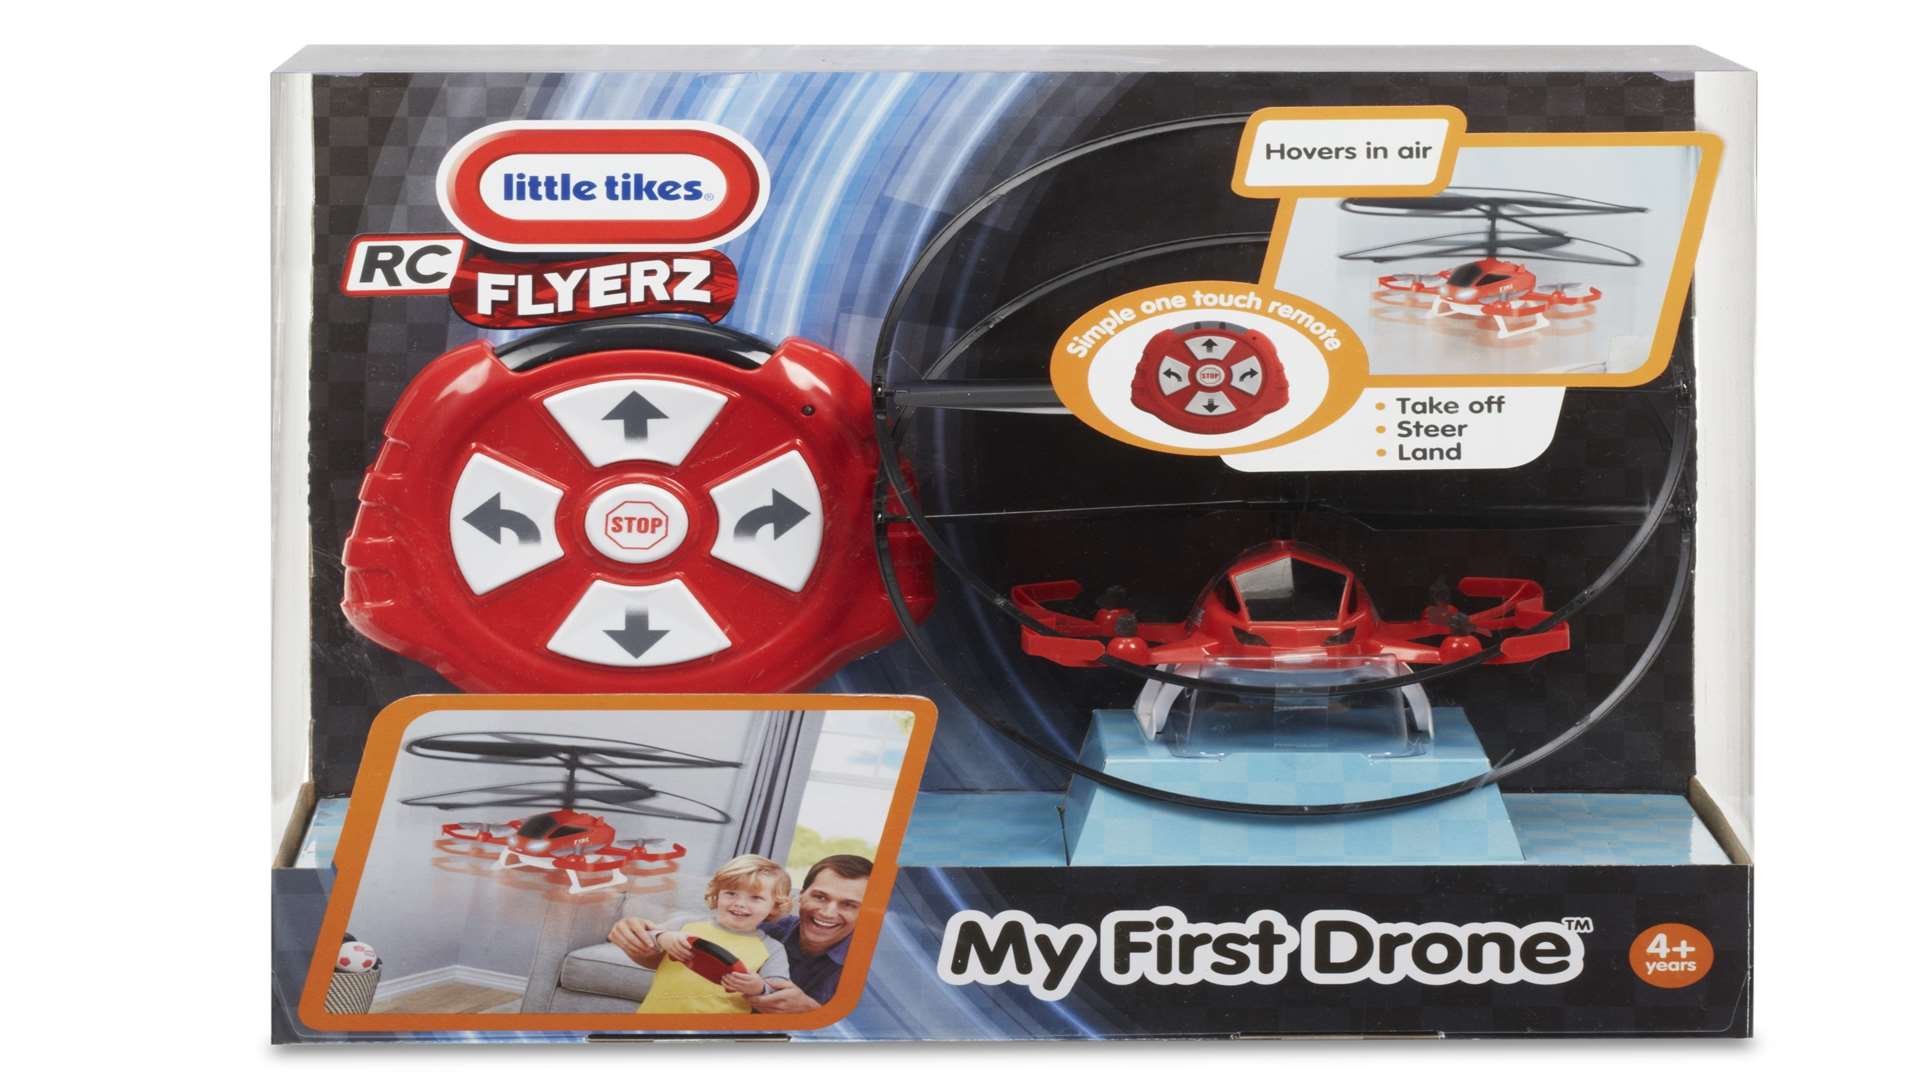 Little Tikes' My First Drone